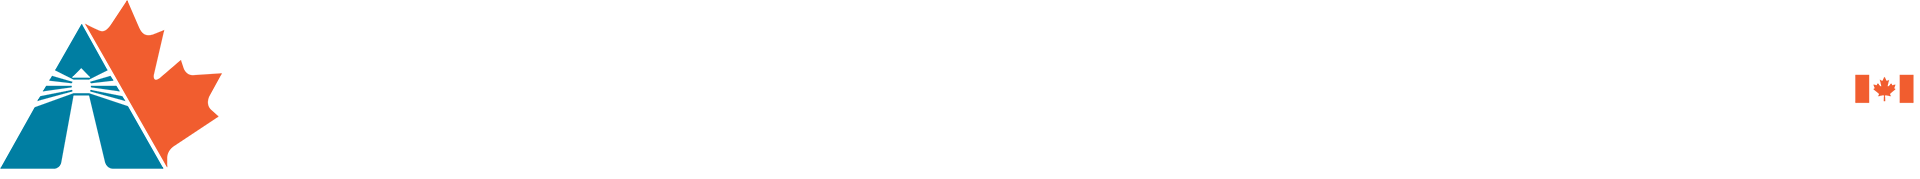 Logos for ACOA and the Government of Canada